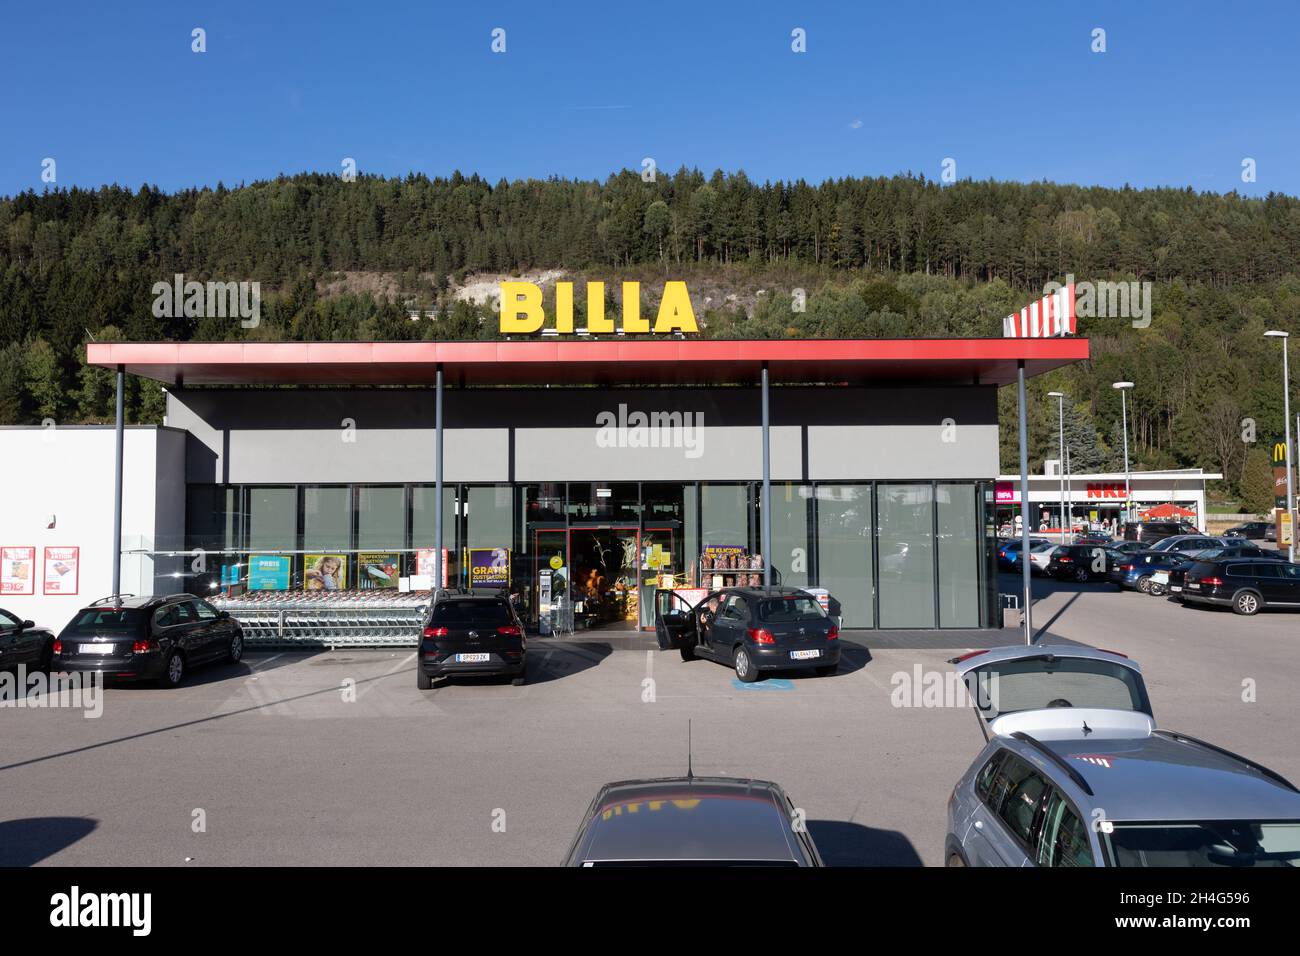 A Billa supermarket of the REWE Group in Spittal, Austria, 11.10.2021. Stock Photo